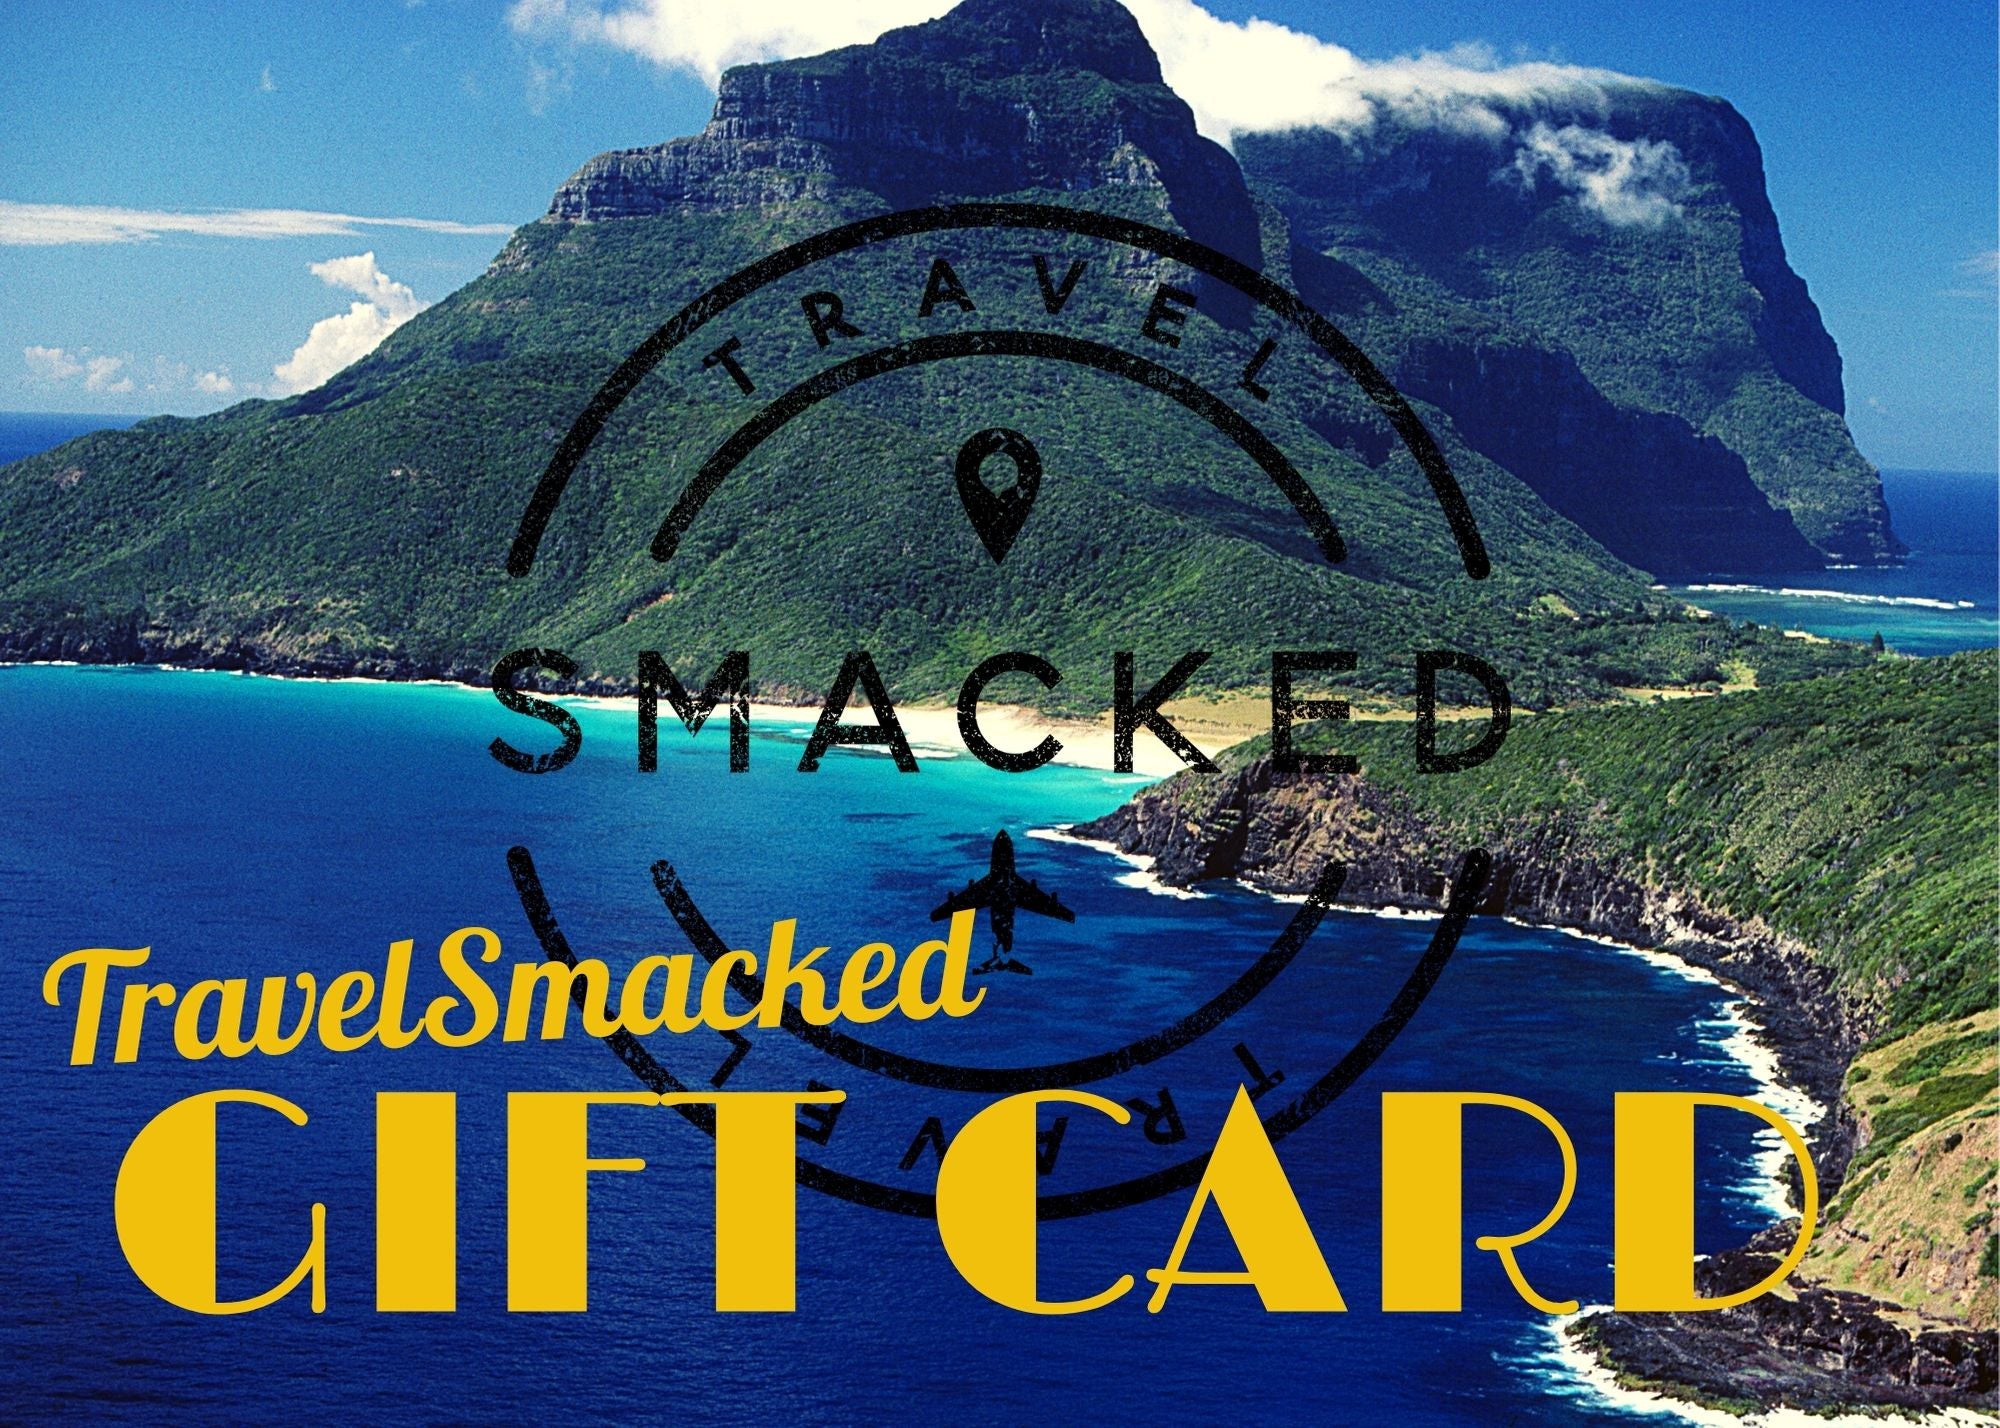 TravelSmacked Gift Card